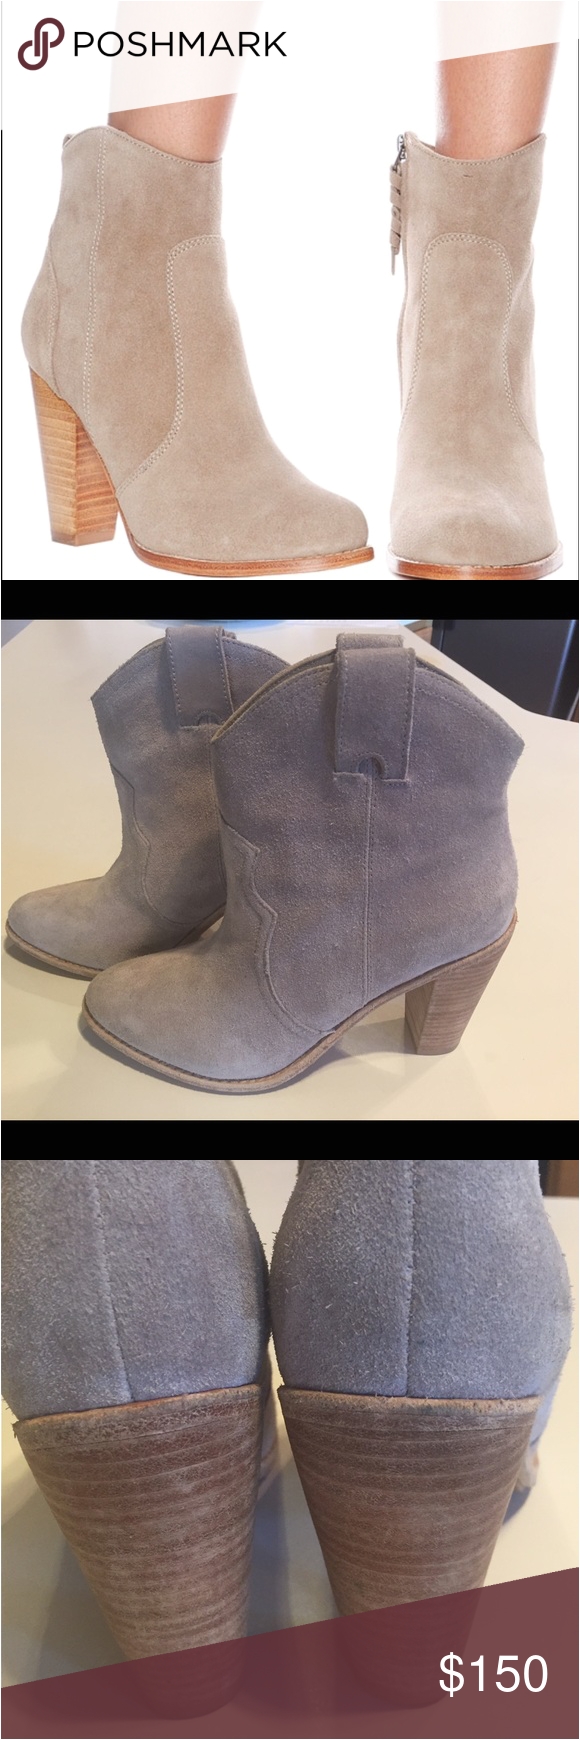 joie dalton suede bootie size 38 5 color cement joie dalton suede bootie size 38 5 color is cement my lighting is bad and the color is as shown in